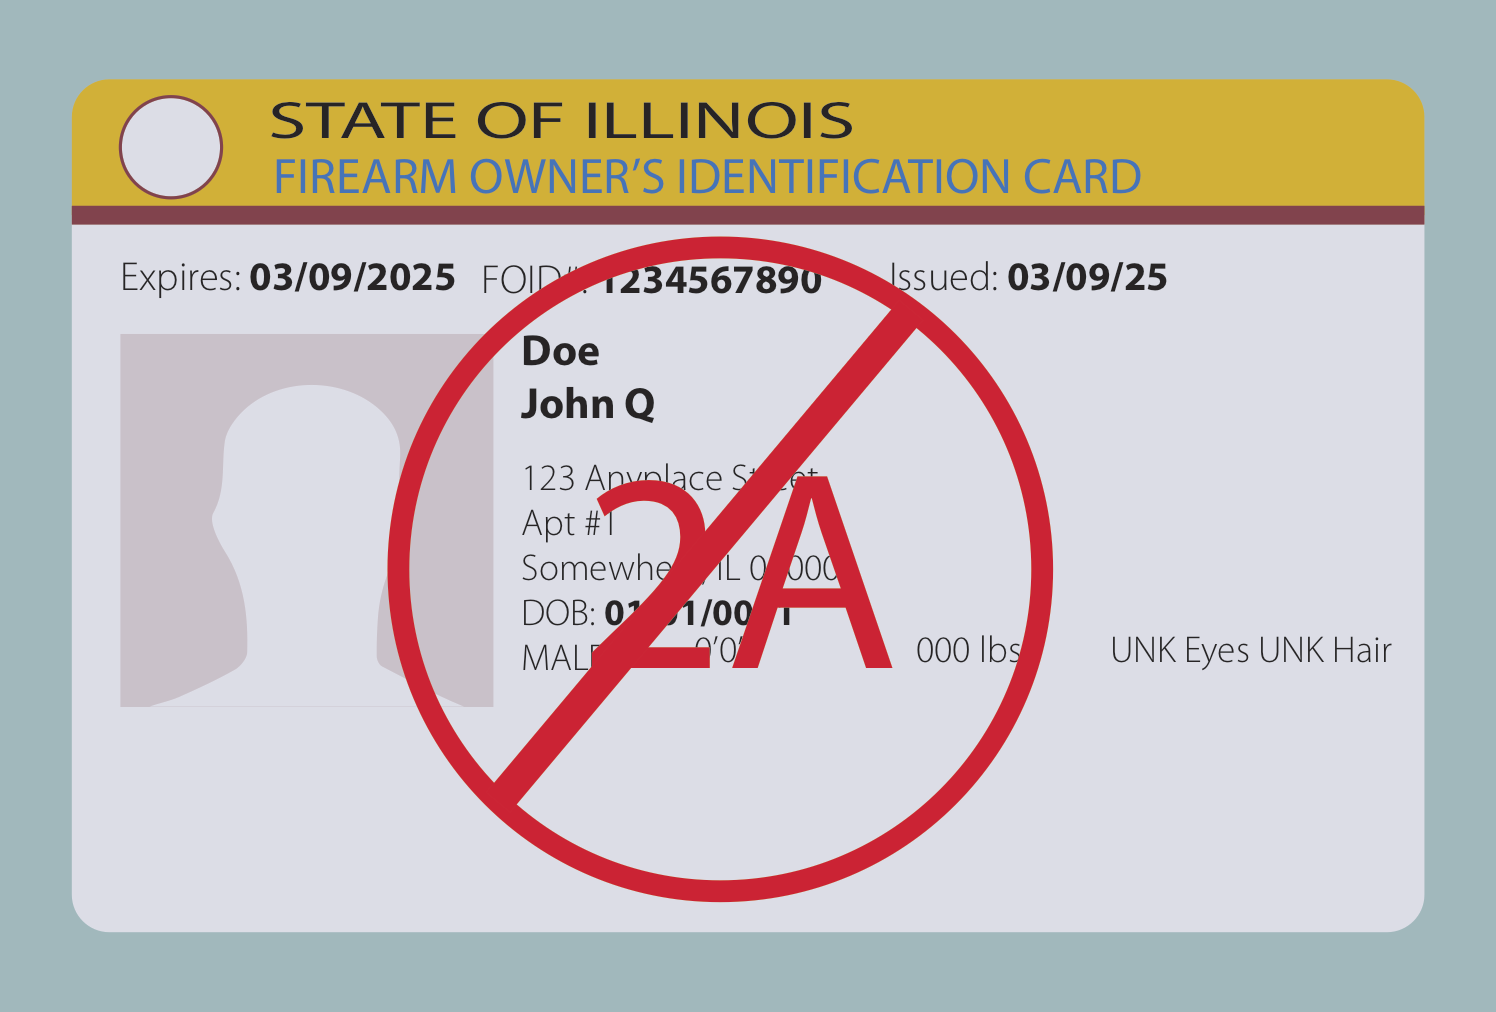 how-to-renew-foid-card-in-illinois-illinois-state-police-urge-foid-card-holders-to-renew-early